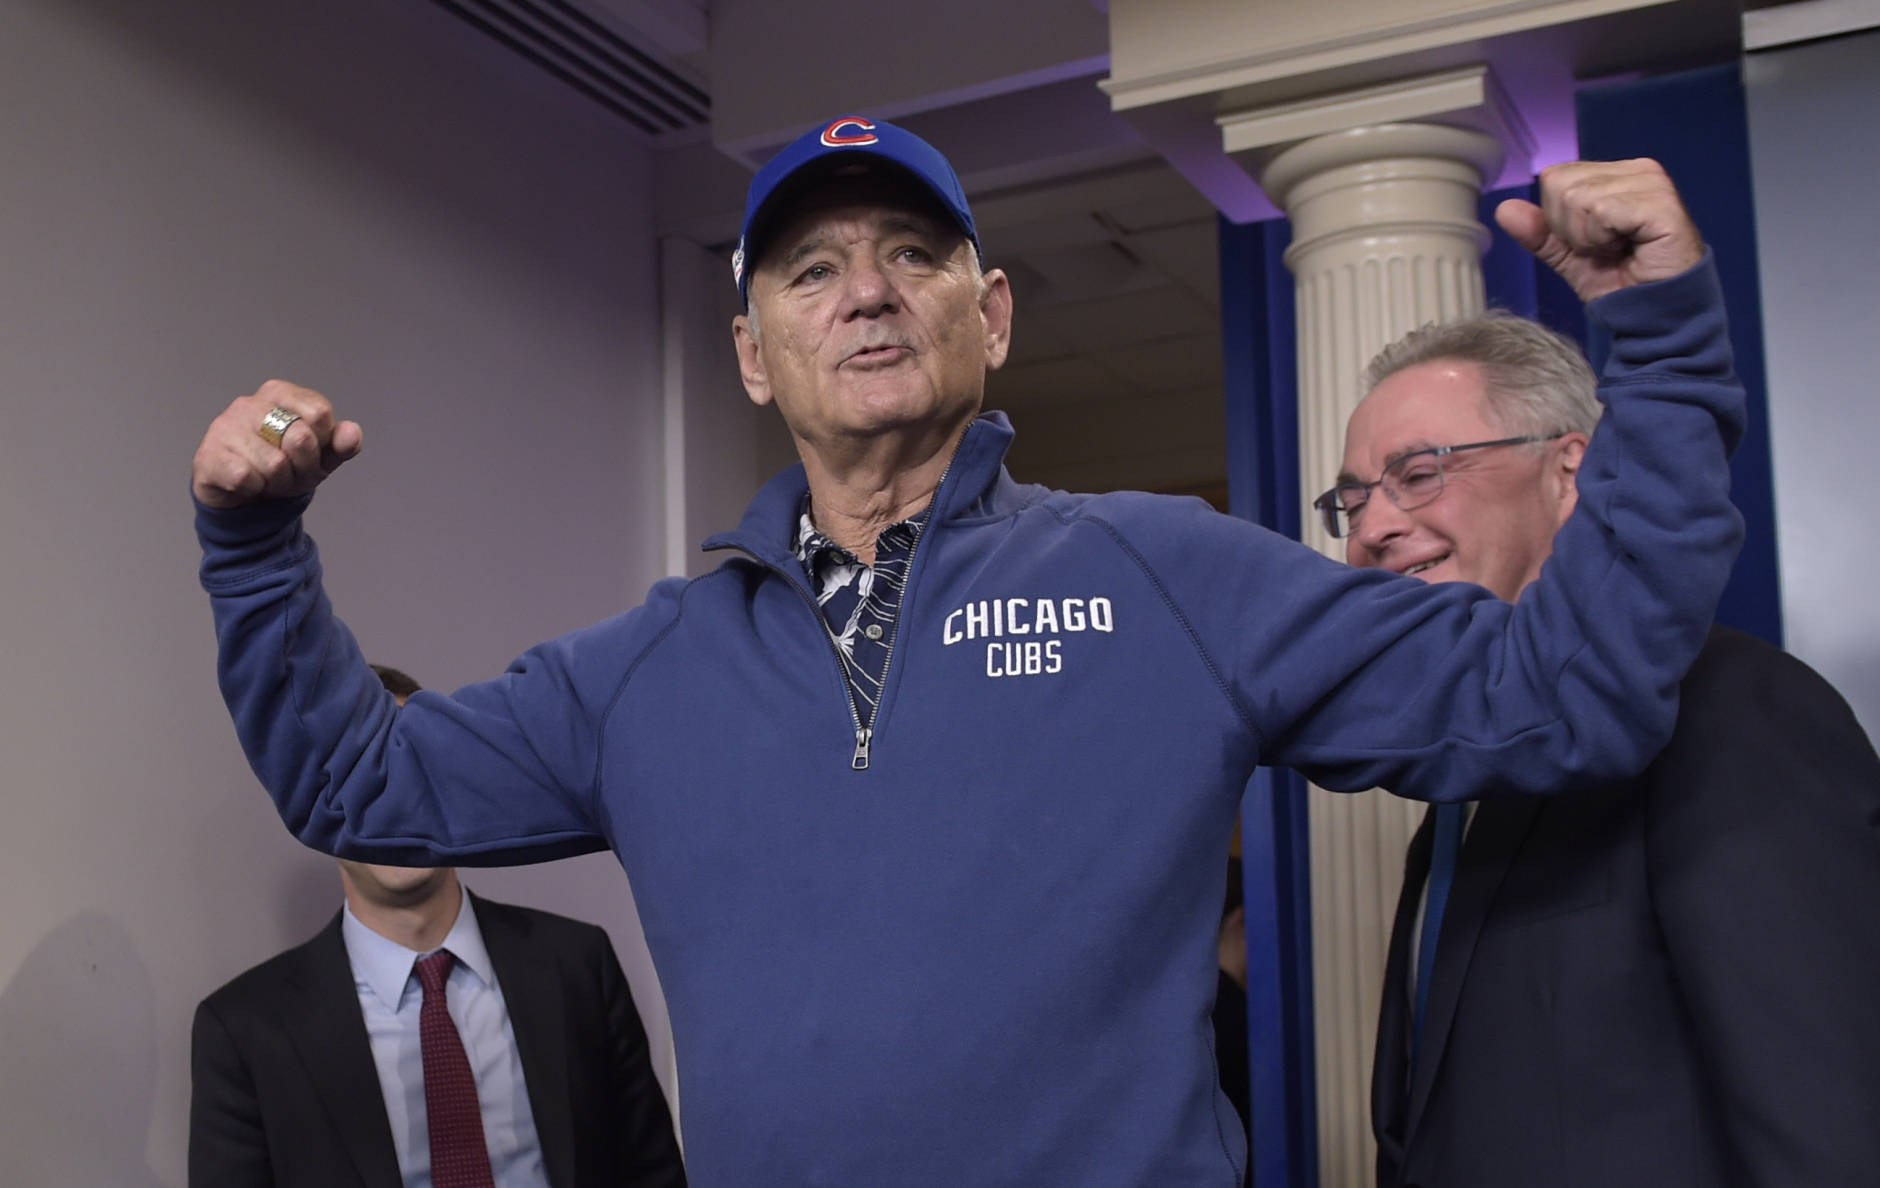 Actor Bill Murray speaks visits the White House briefing room in Washington, Friday, Oct. 21, 2016. Murray is in Washington to receive the Mark Twain Prize for American Humor/ (AP Photo/Susan Walsh)